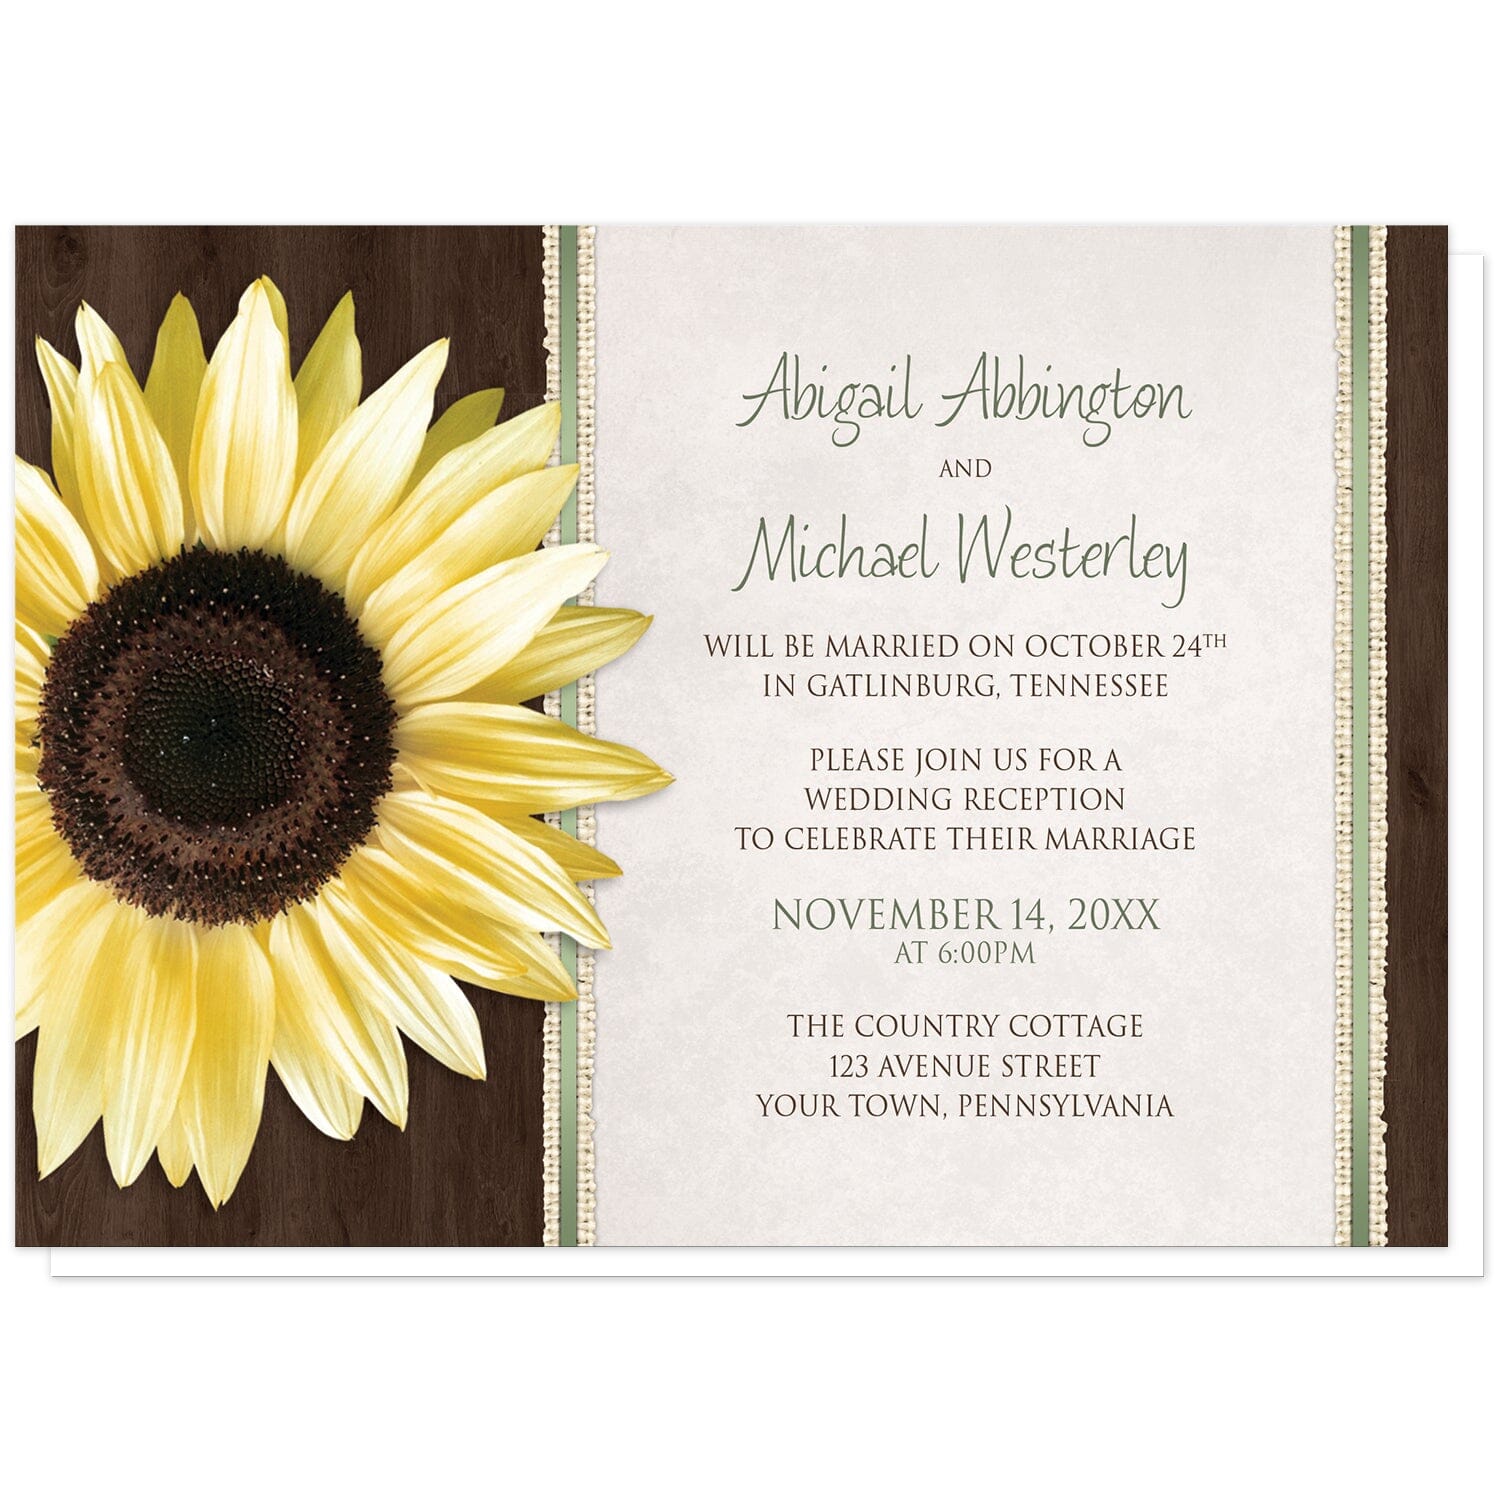 Country Sunflower Wood Brown Green Reception Only Invitations at Artistically Invited. Country sunflower wood brown green reception only invitations in a floral southern style, with a big yellow sunflower over a dark brown wood pattern illustration on the left side. Your personalized post-wedding reception celebration details are custom printed in green and brown over a beige parchment design to the right of the sunflower, outlined vertically by burlap strips and green stripes.